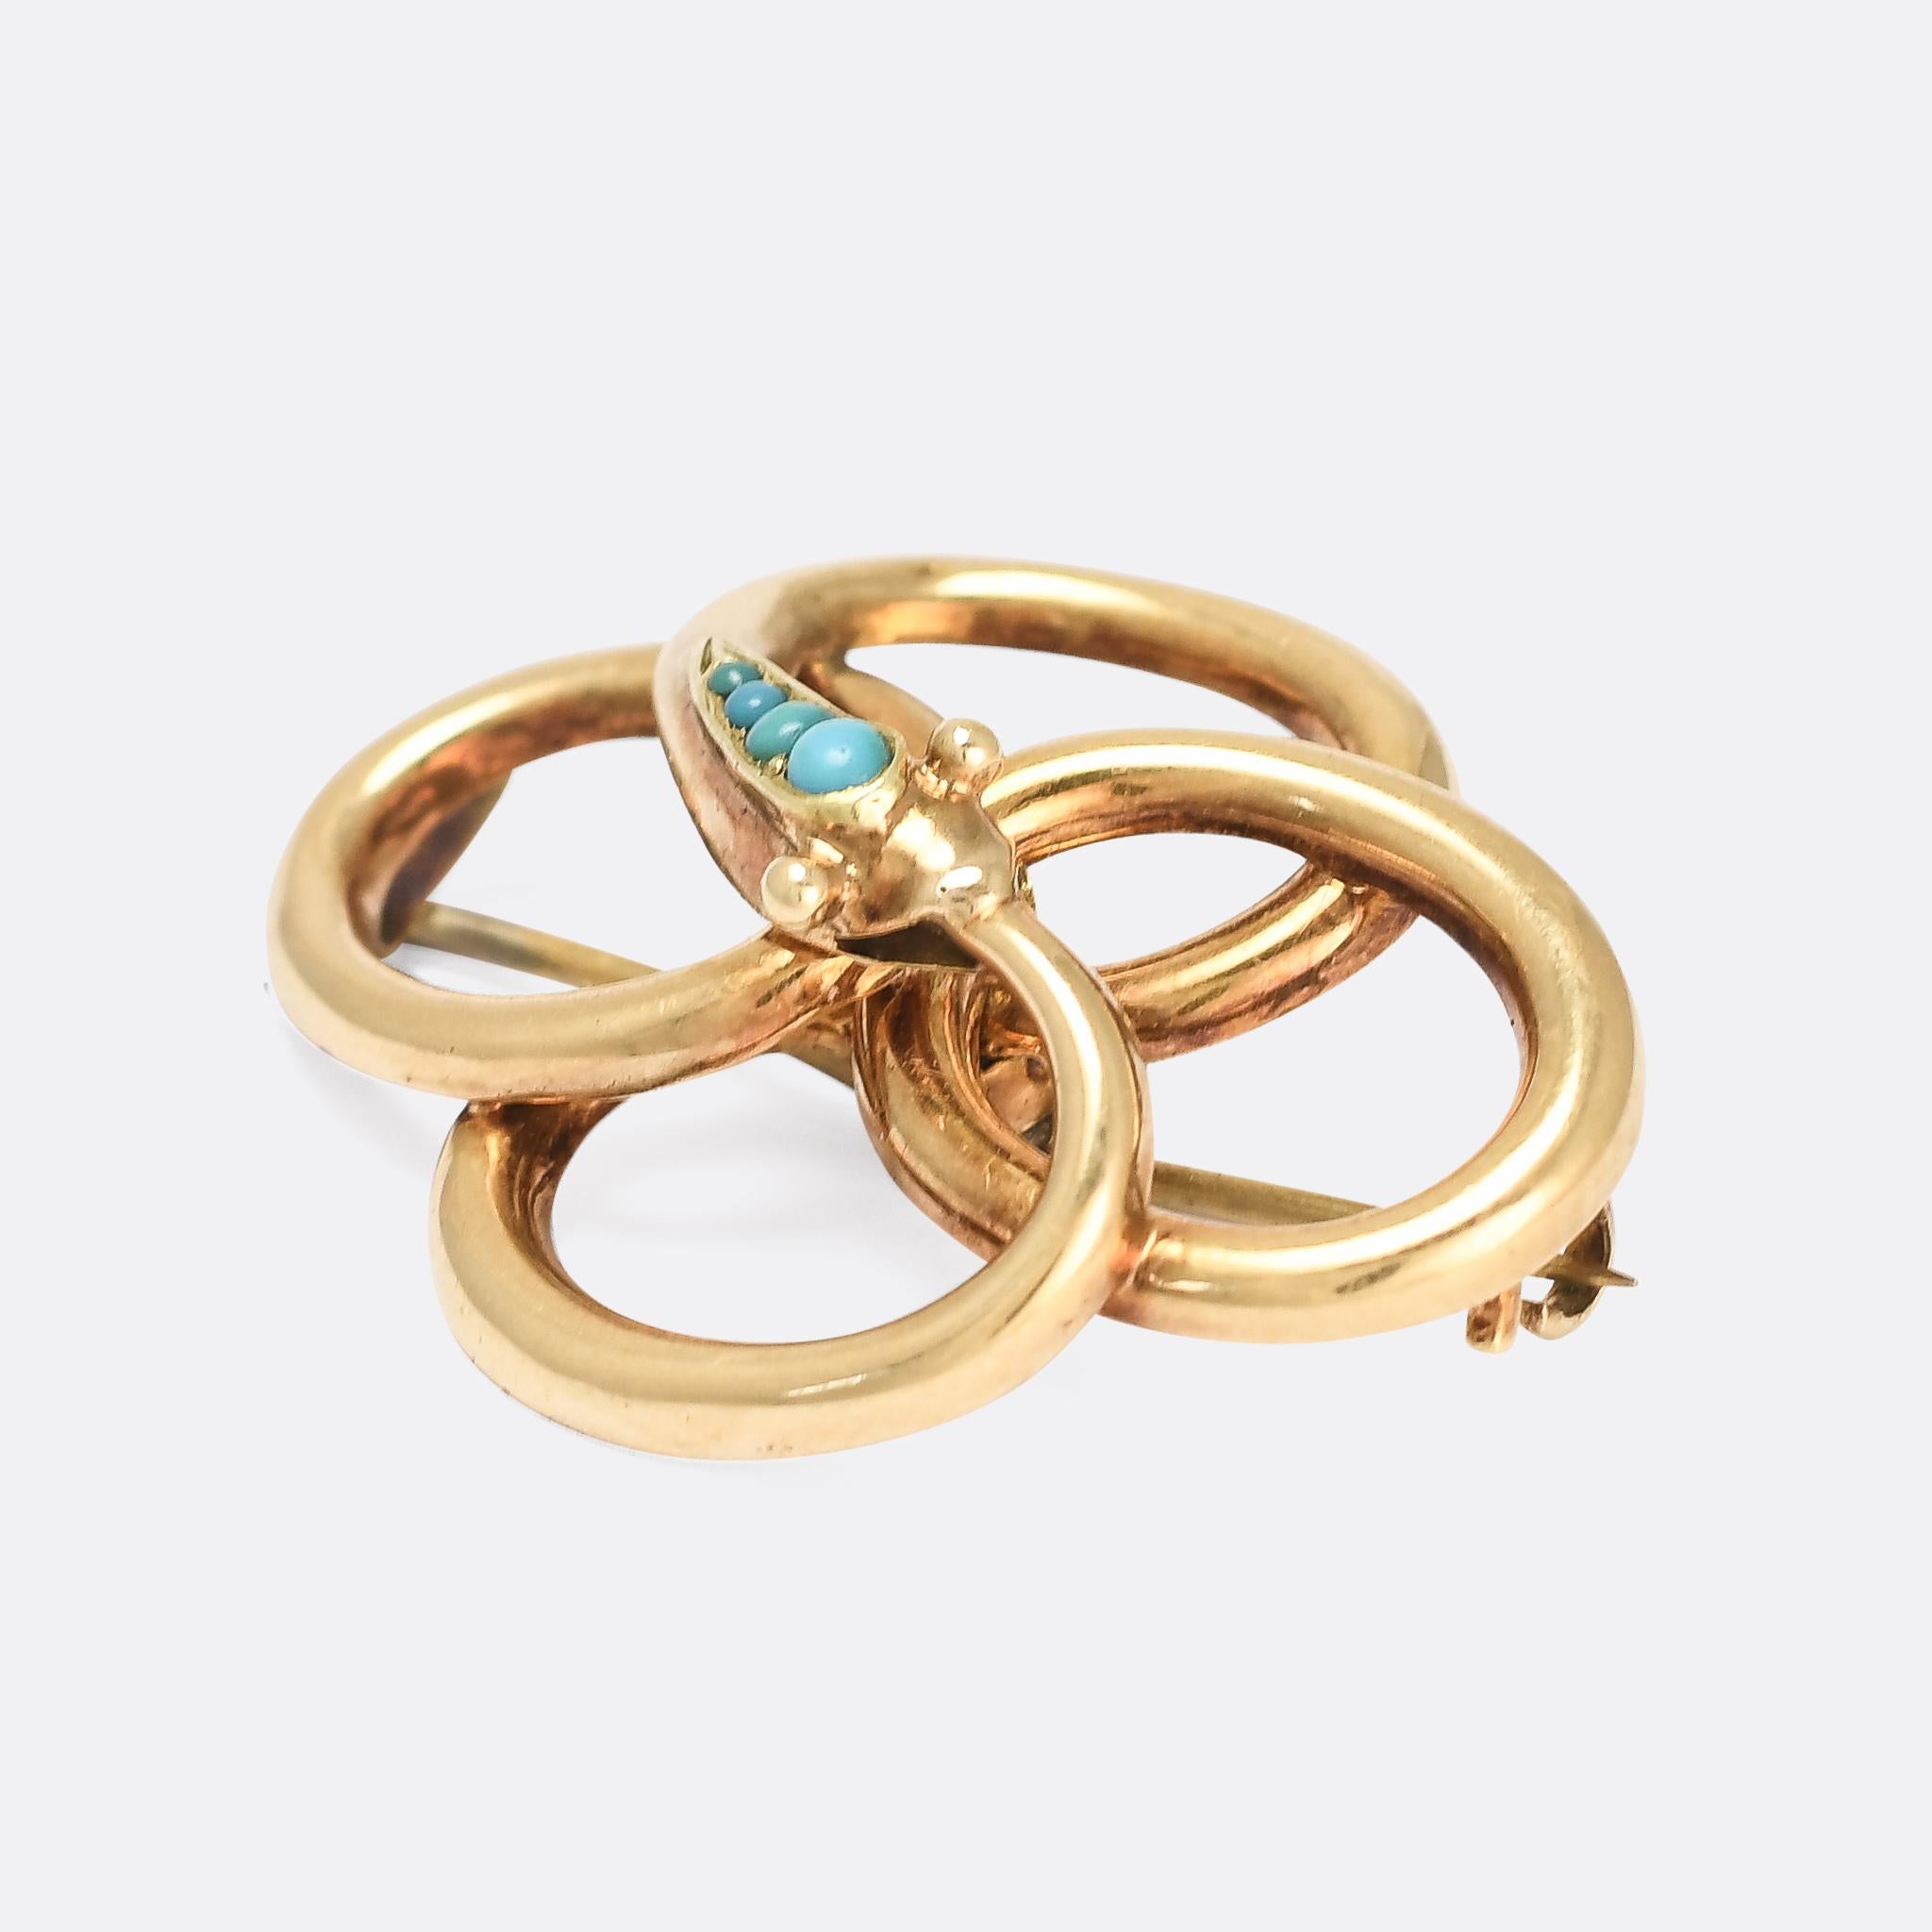 A gorgeous antique serpent brooch in 15 karat gold. It dates from the mid Victorian period, circa 1860, with a graduated row of turquoise cabochons and a cartoonish head/face. The body coils around itself, formed into quatrefoil, and ends with the